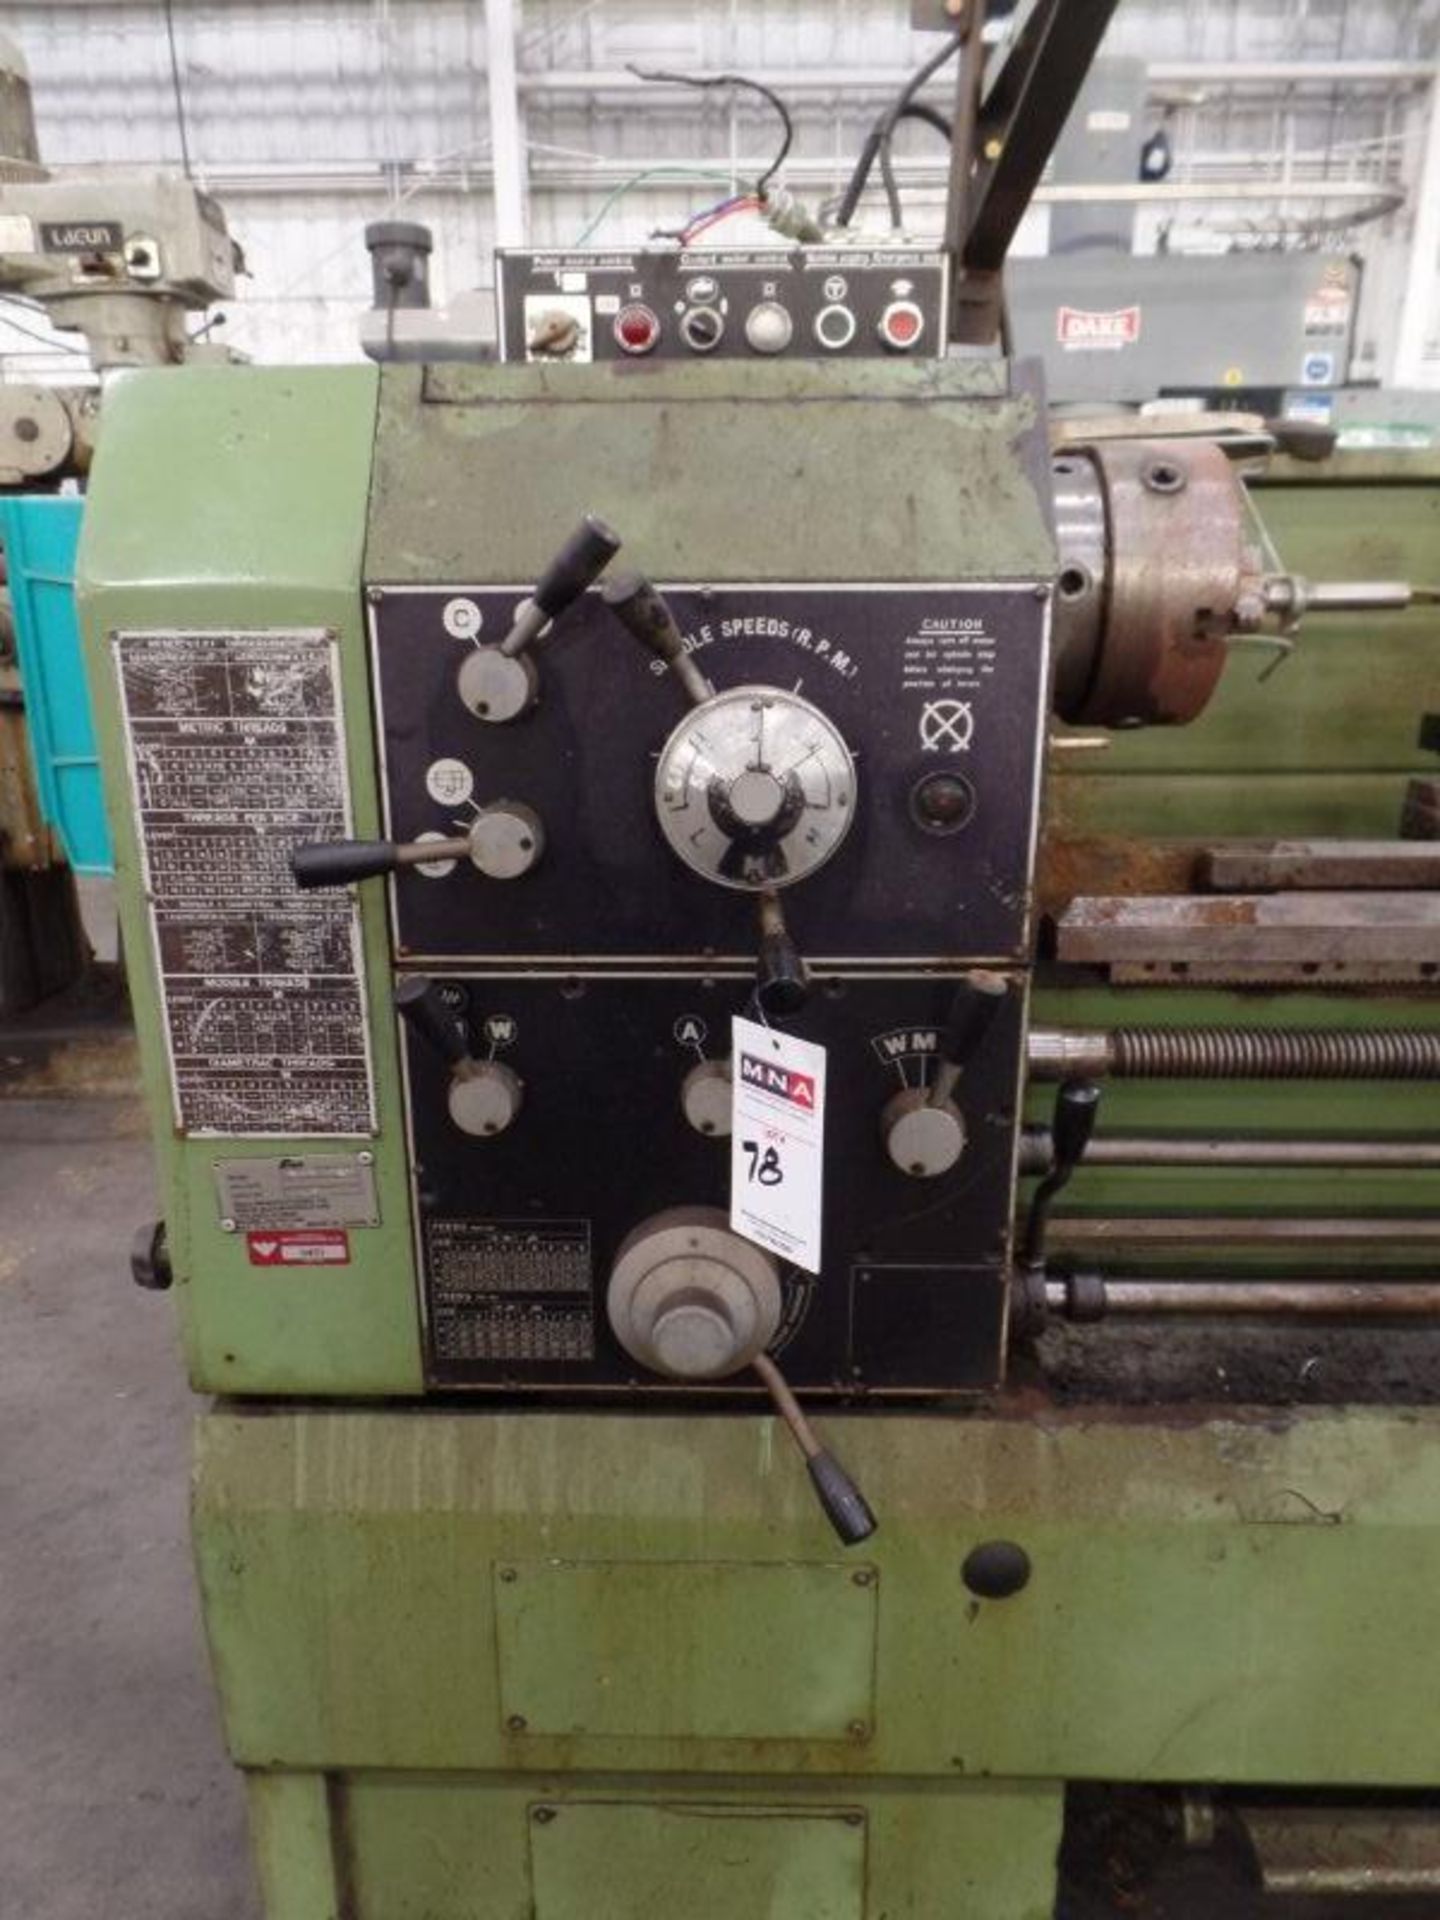 Enco 1111760 Manual Lathe, 8" Chuck, 56" Between Centers, s/n 104 - Image 8 of 10